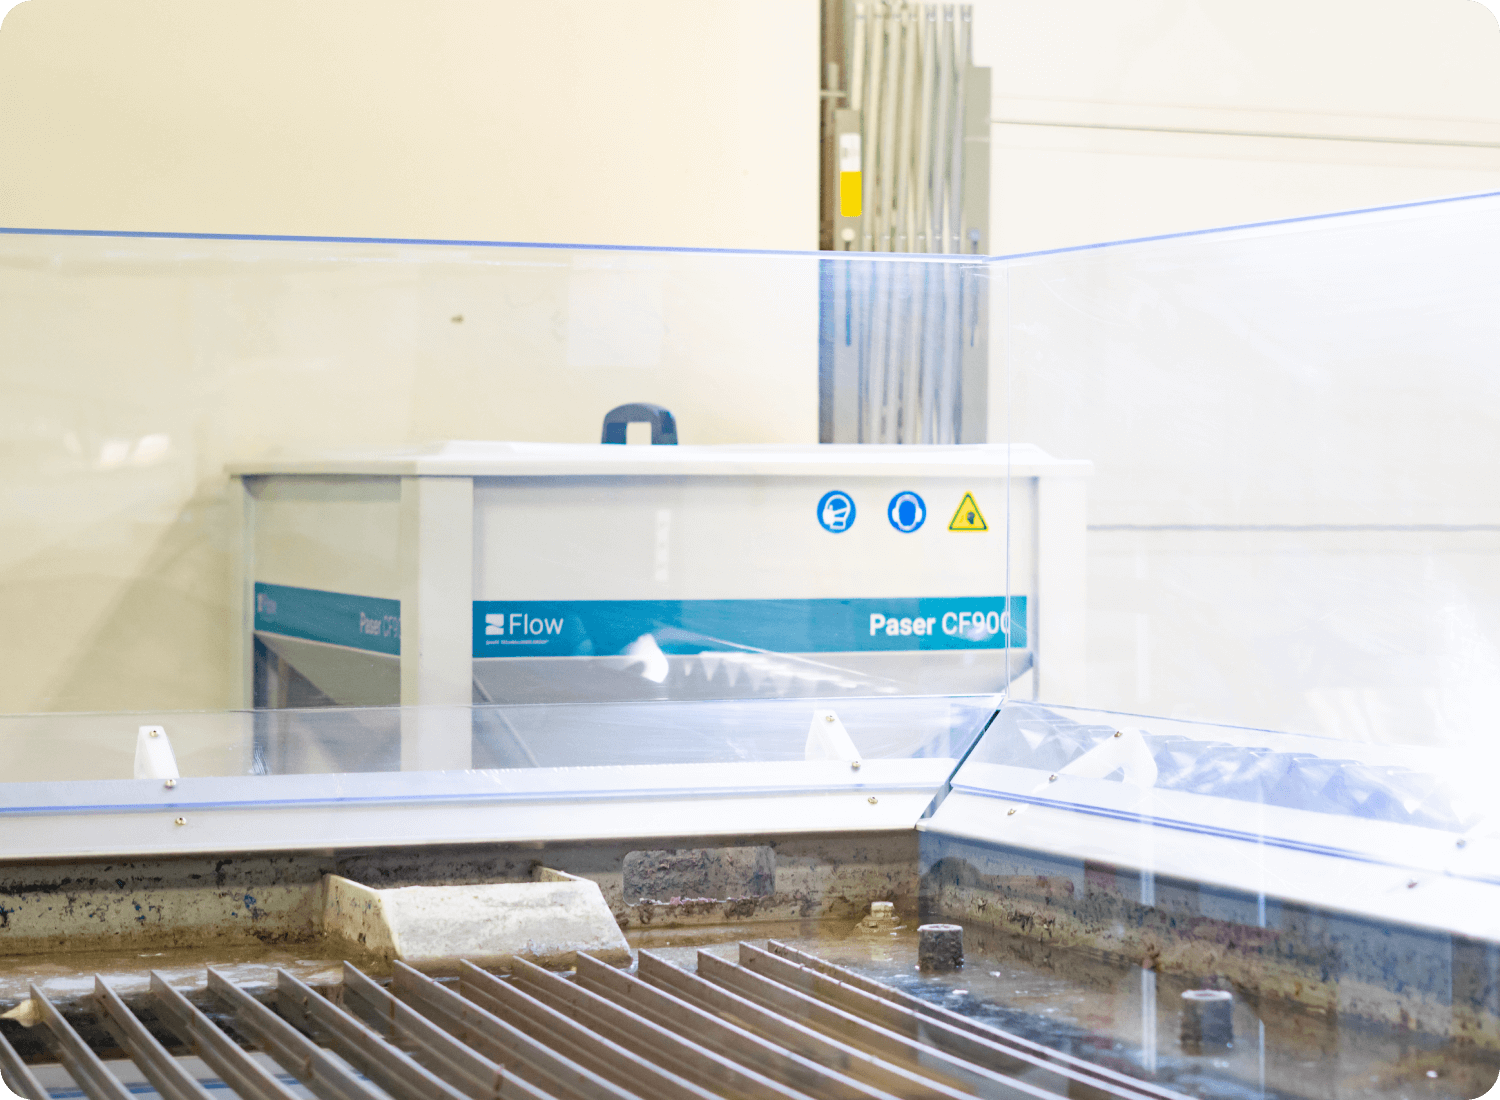 photo of the Paser CF900 shown behind a waterjet table and splash guards